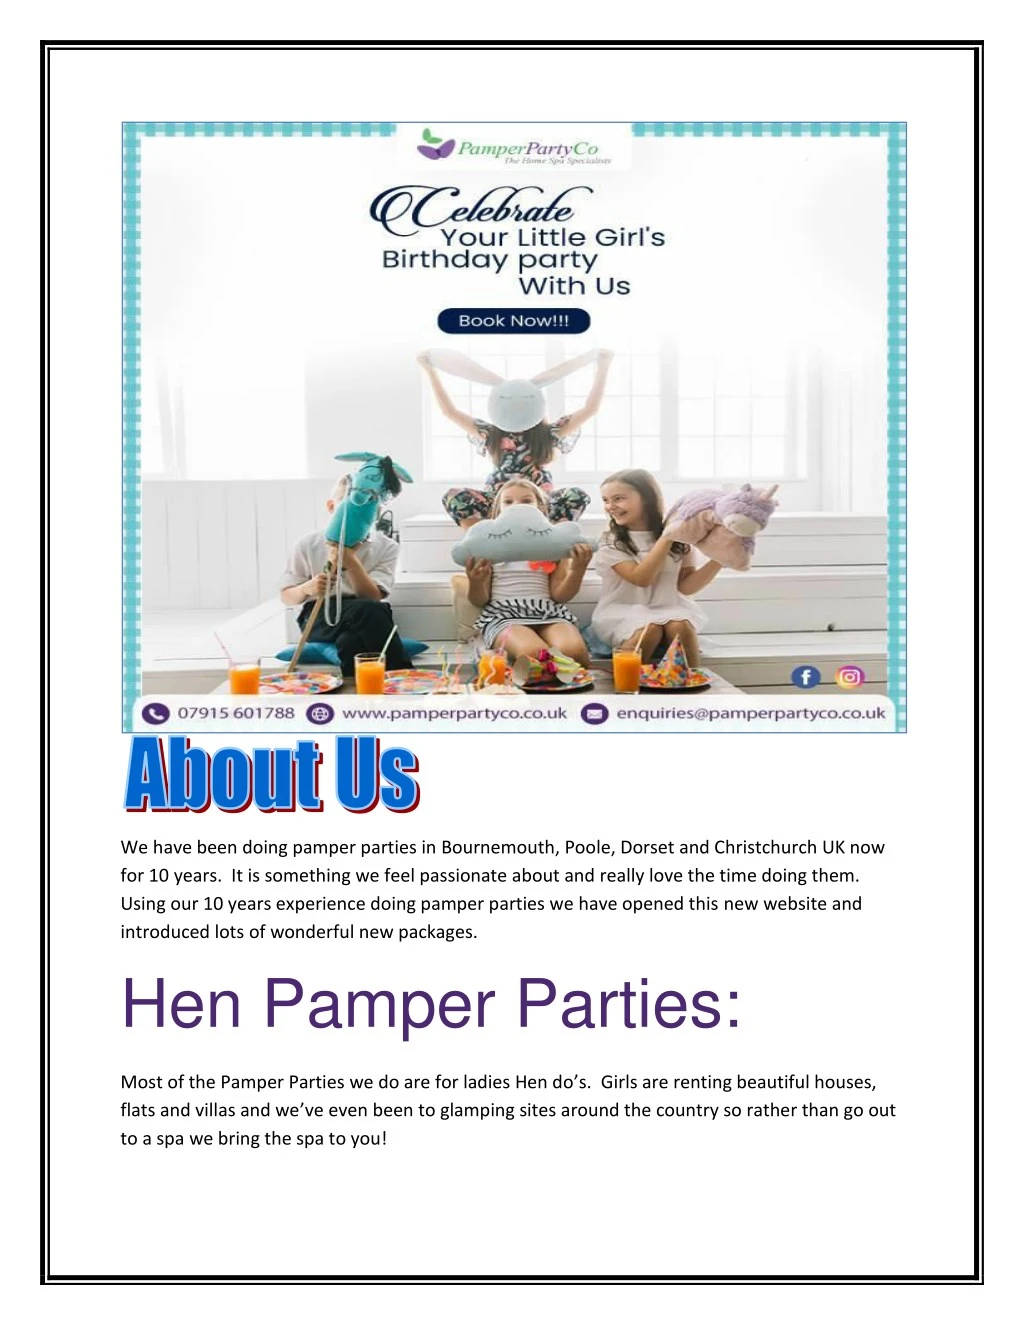 we have been doing pamper parties in bournemouth